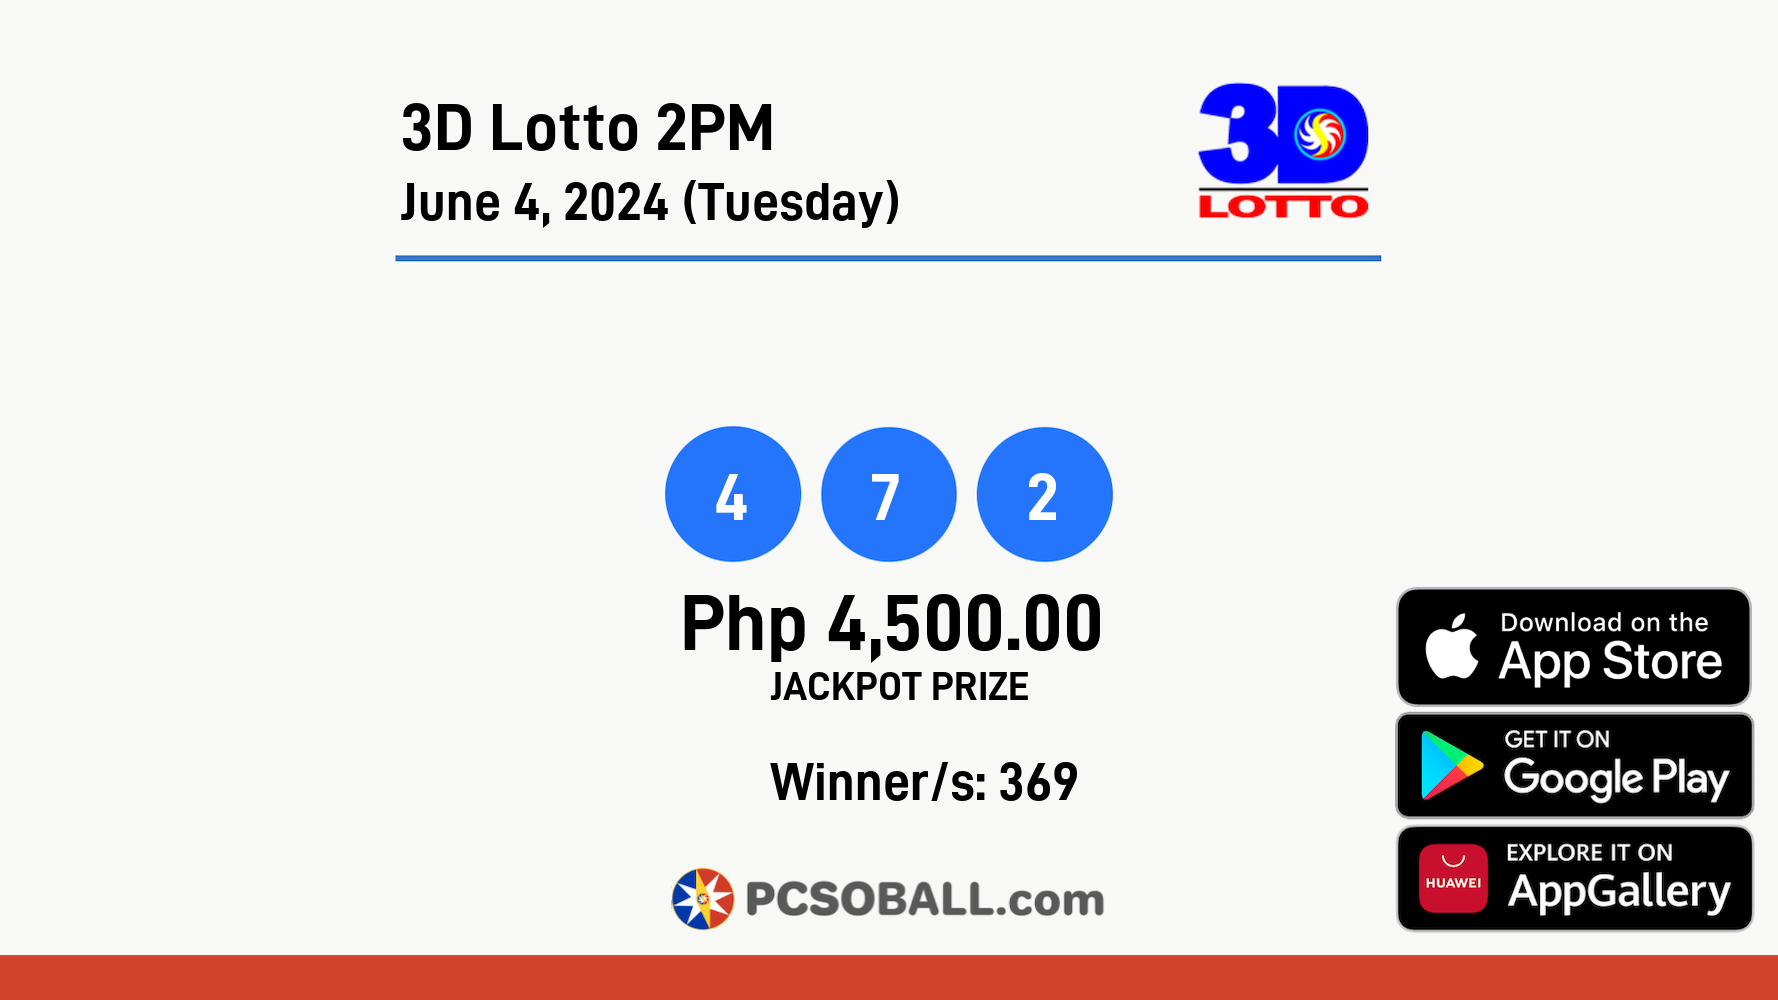 3D Lotto 2PM June 4, 2024 (Tuesday) Result